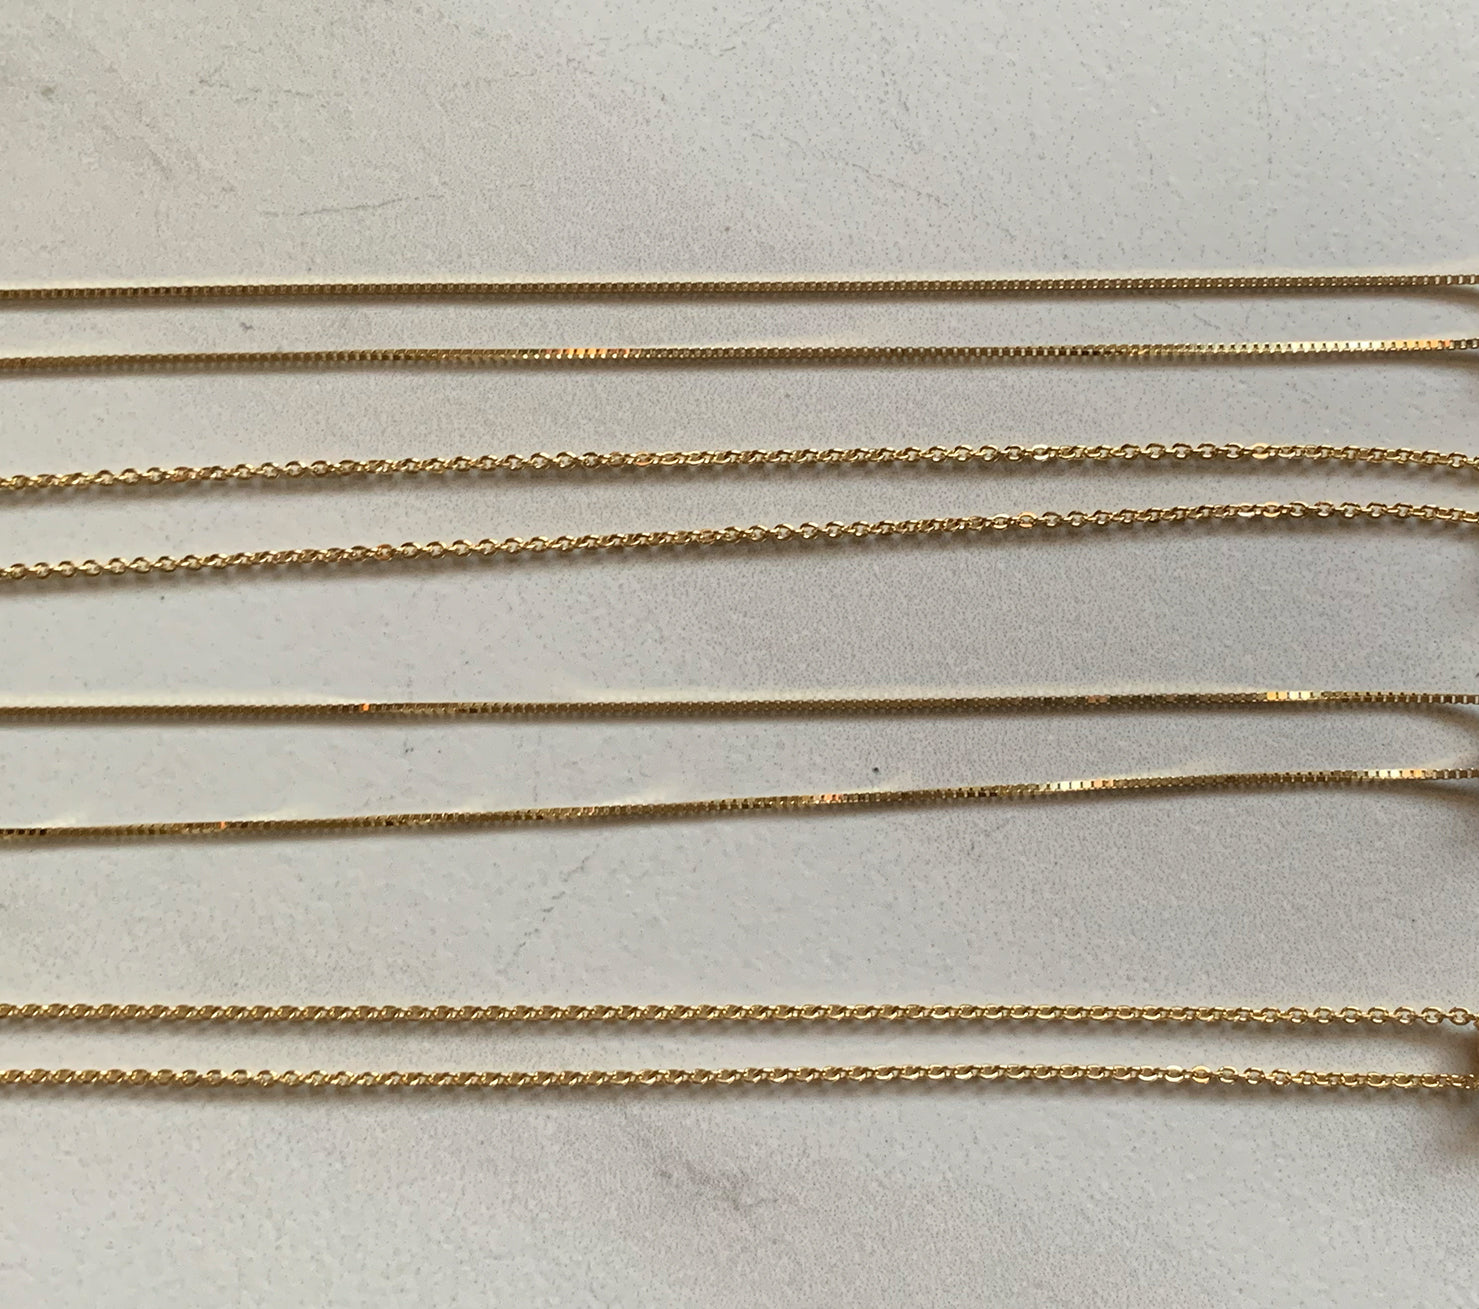 14k Cable Chain